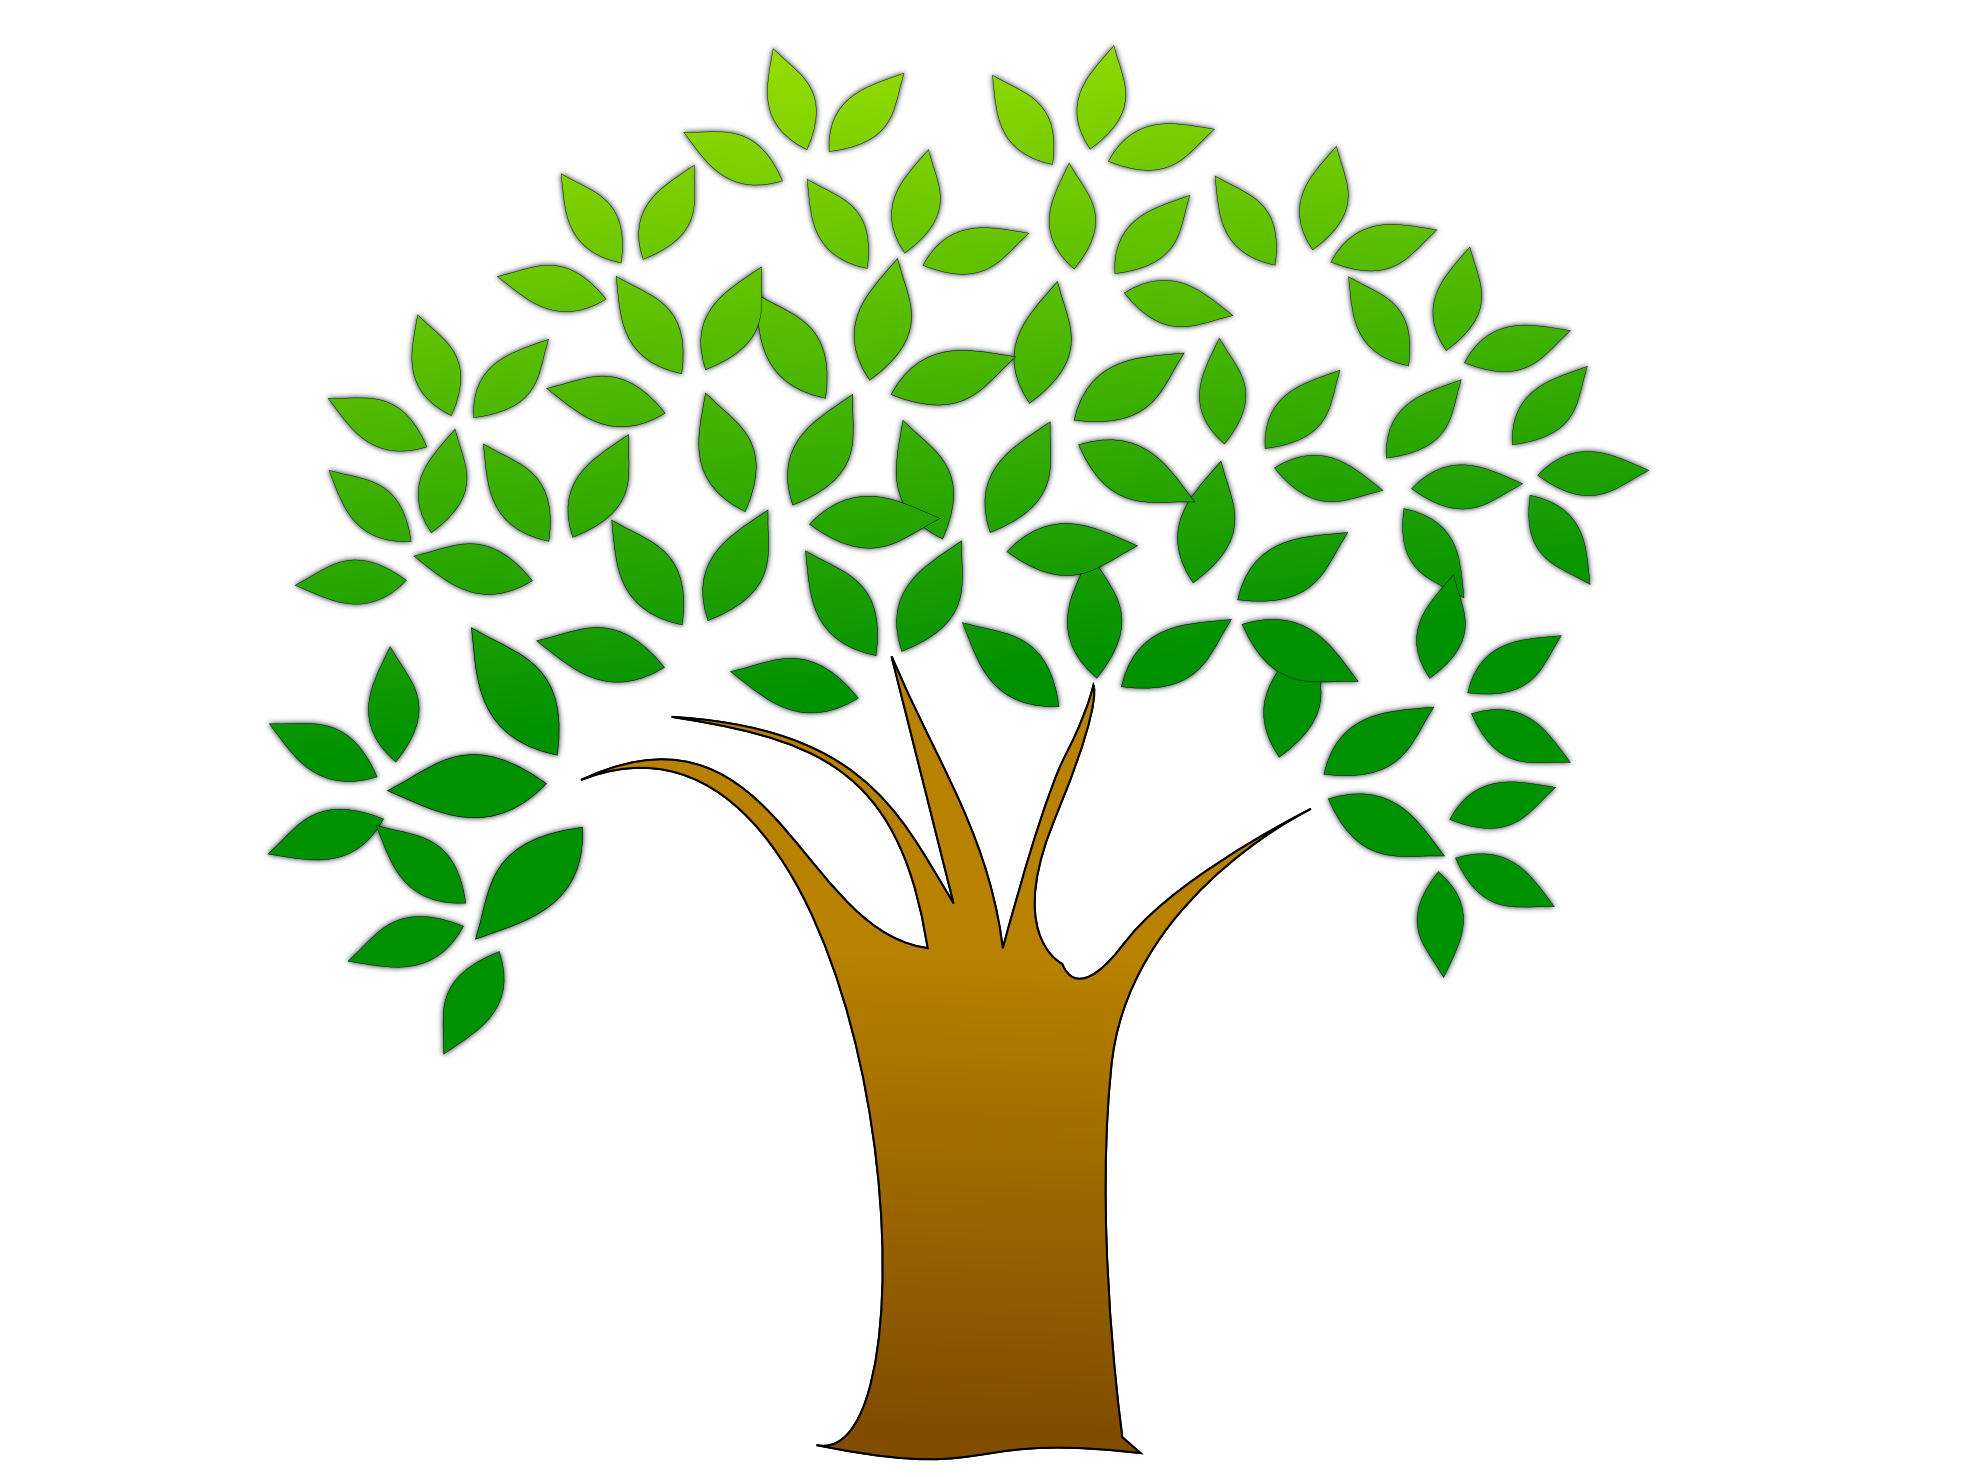 Tree Vector Image - Tree Vector, Transparent background PNG HD thumbnail